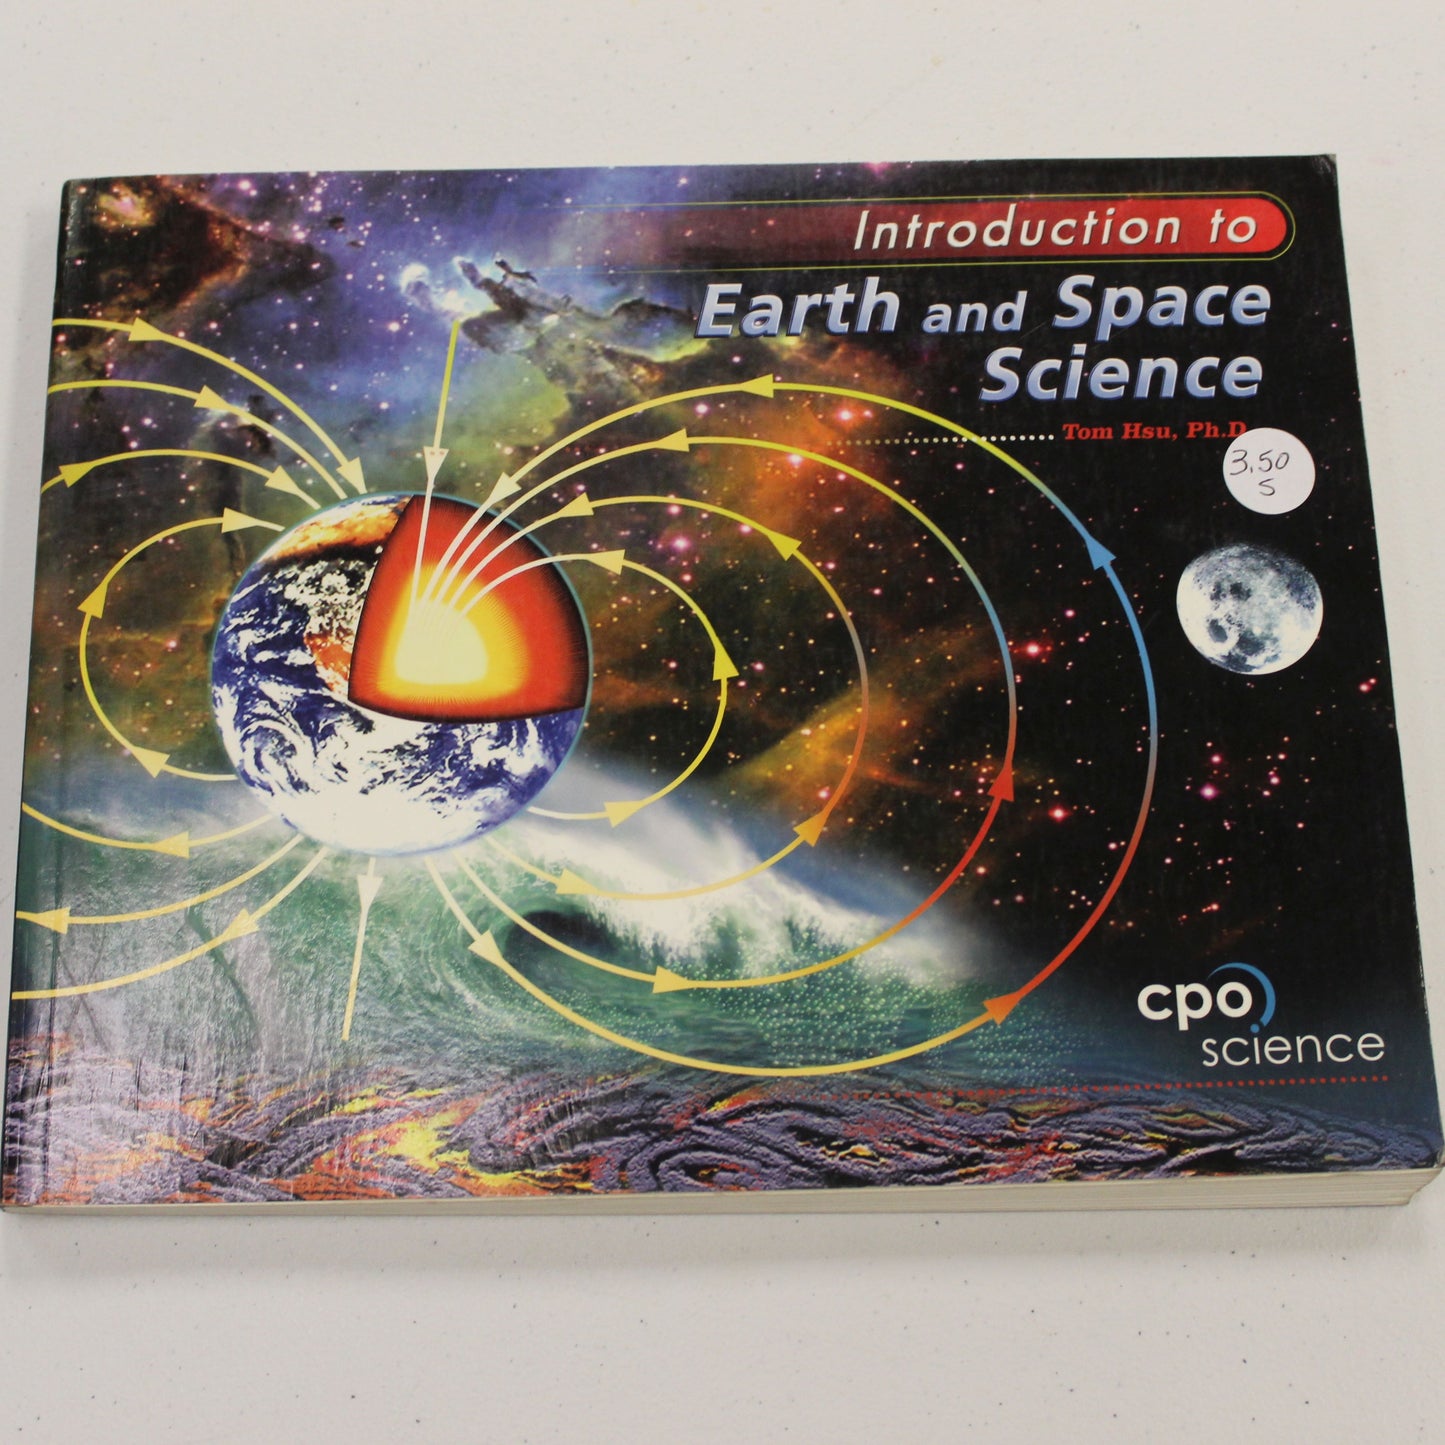 INTRODUCTION TO EARTH AND SPACE SCIENCE